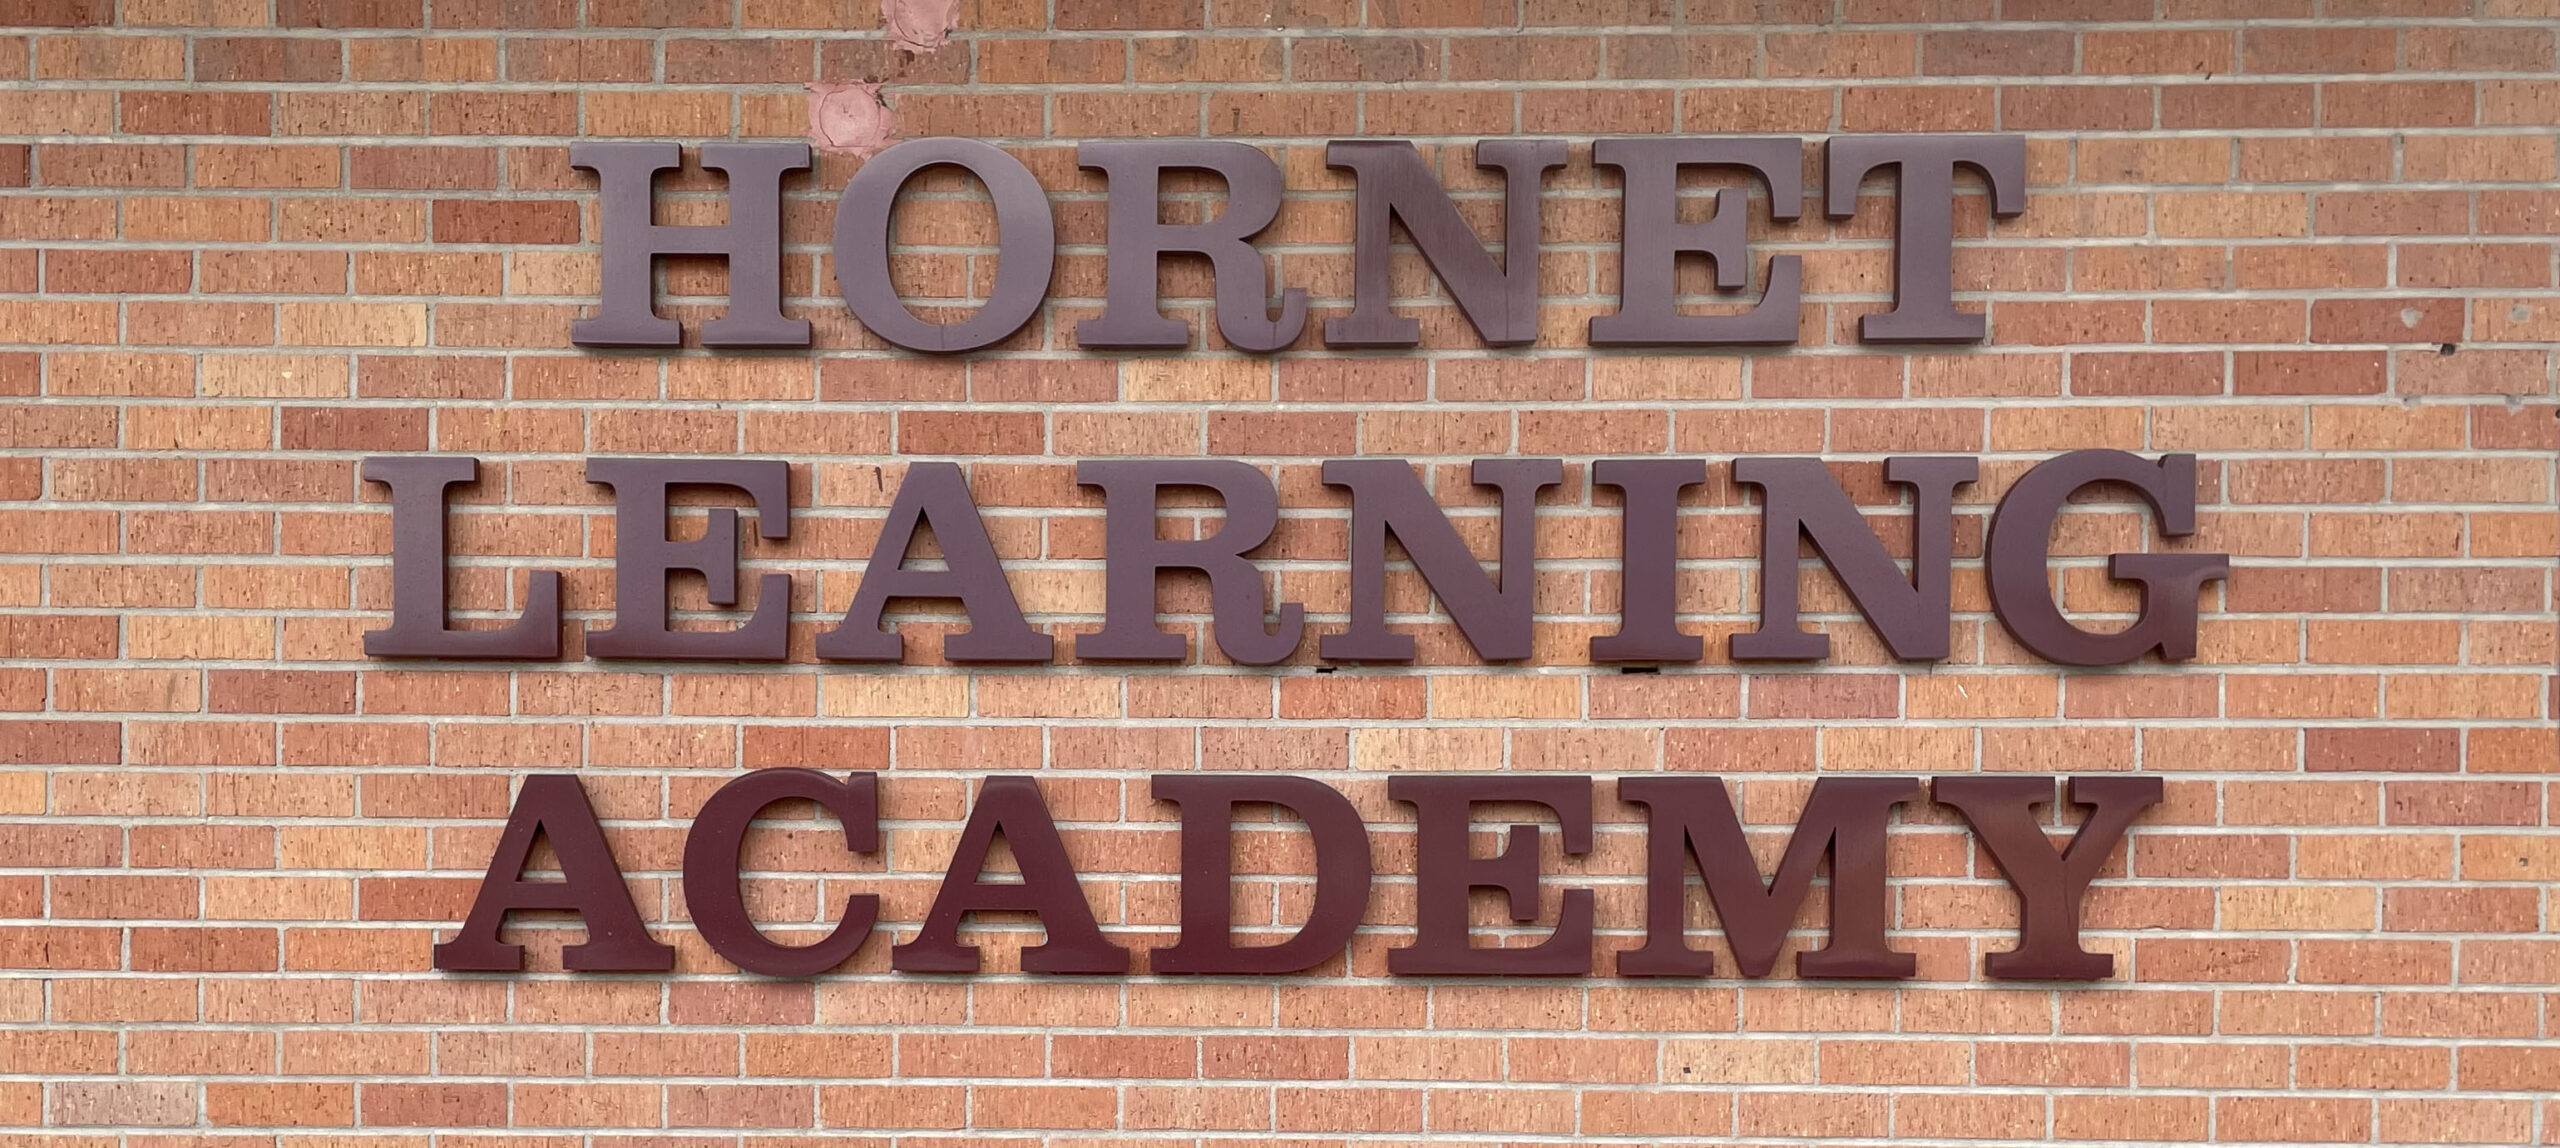 FBISD Hornet Learning Academy Provides Supportive Learning Environment For 61 Students As They Become Life-Long Learners